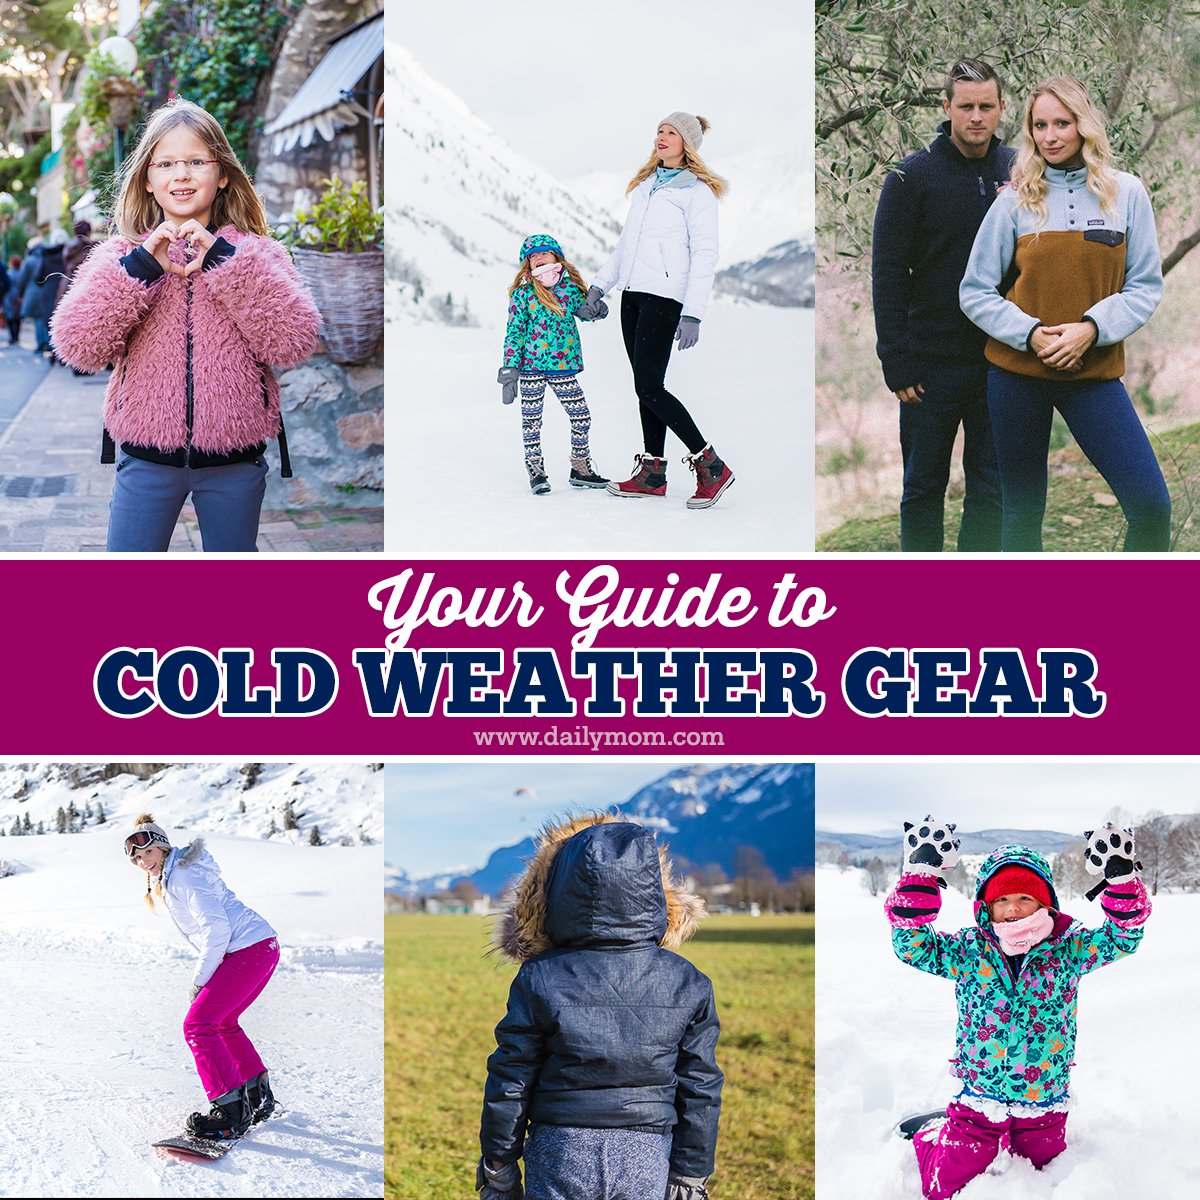 Your Guide To Cold Weather Gear: Cold Weather Clothes To Keep You